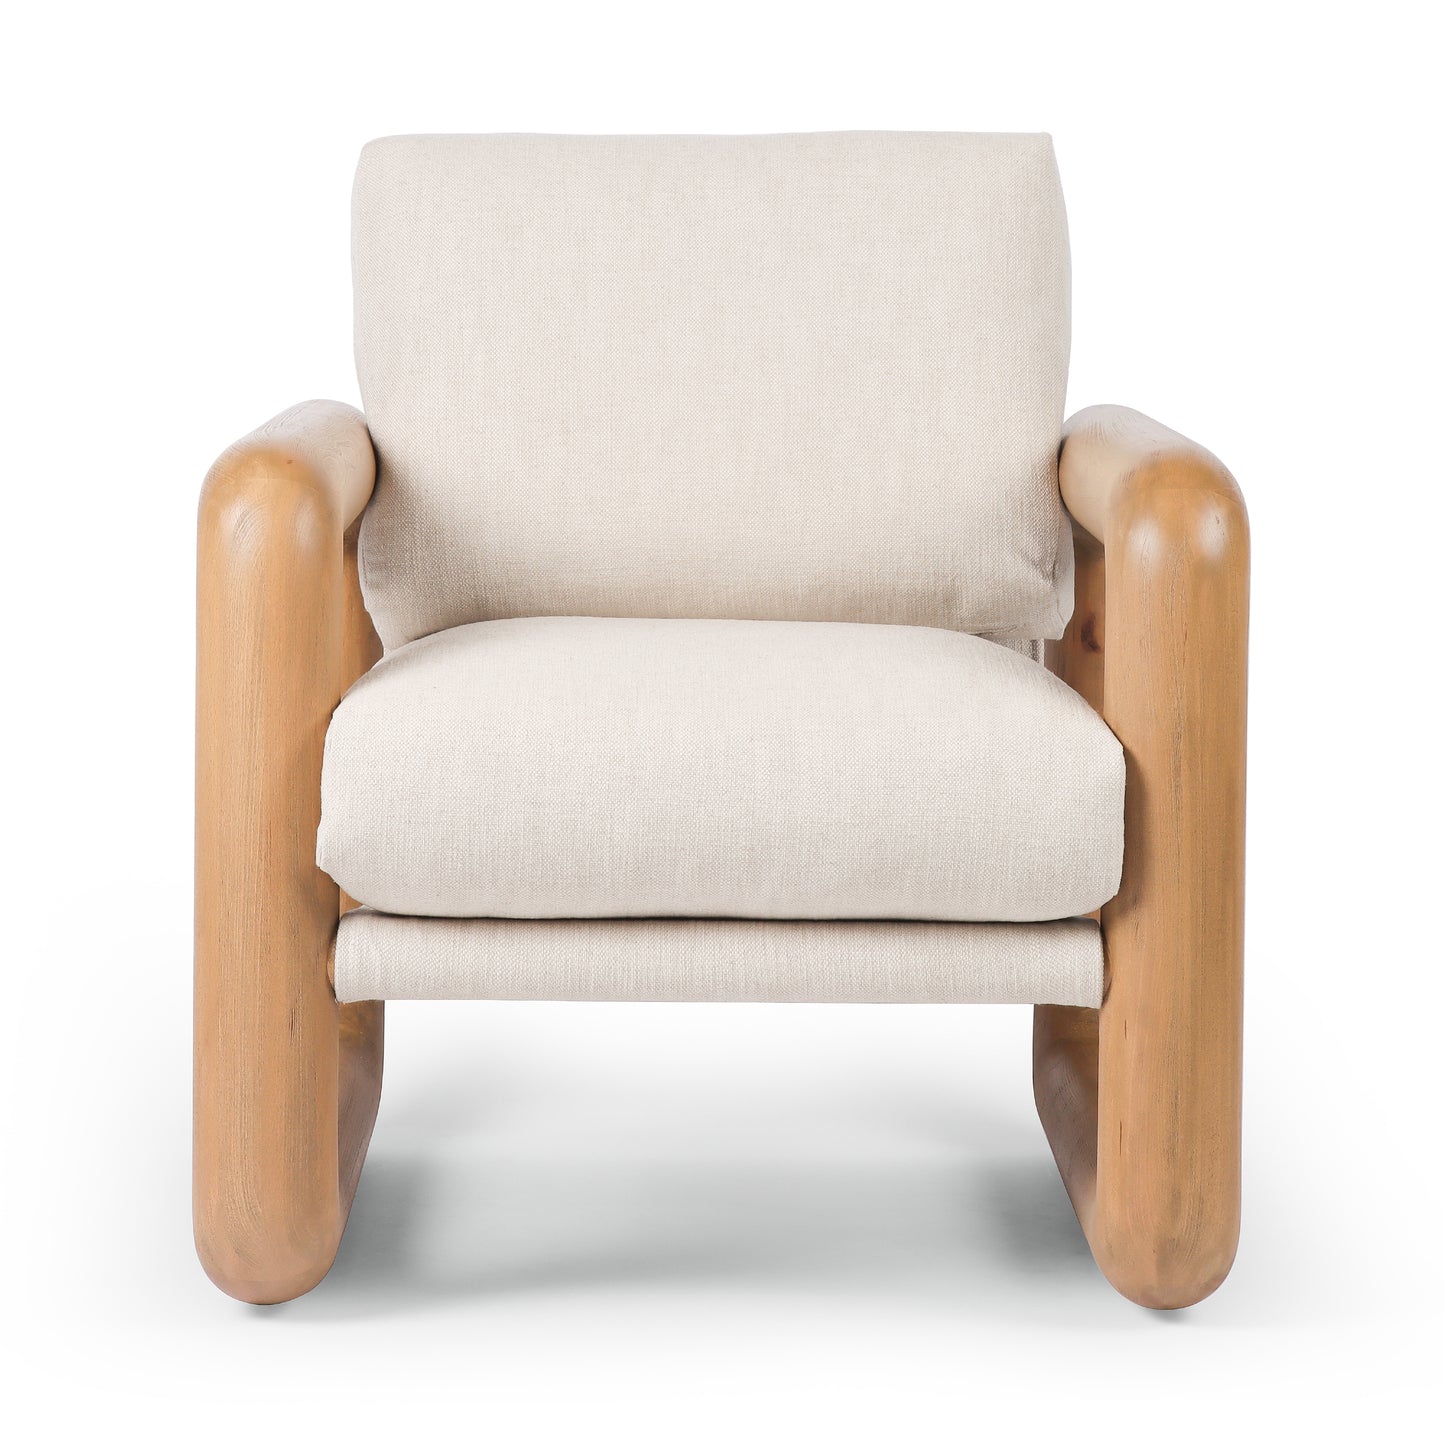 Load image into Gallery viewer, Romeo Chair-Bergamo Parchment Lounge Chair Four Hands     Four Hands, Mid Century Modern Furniture, Old Bones Furniture Company, Old Bones Co, Modern Mid Century, Designer Furniture, https://www.oldbonesco.com/
